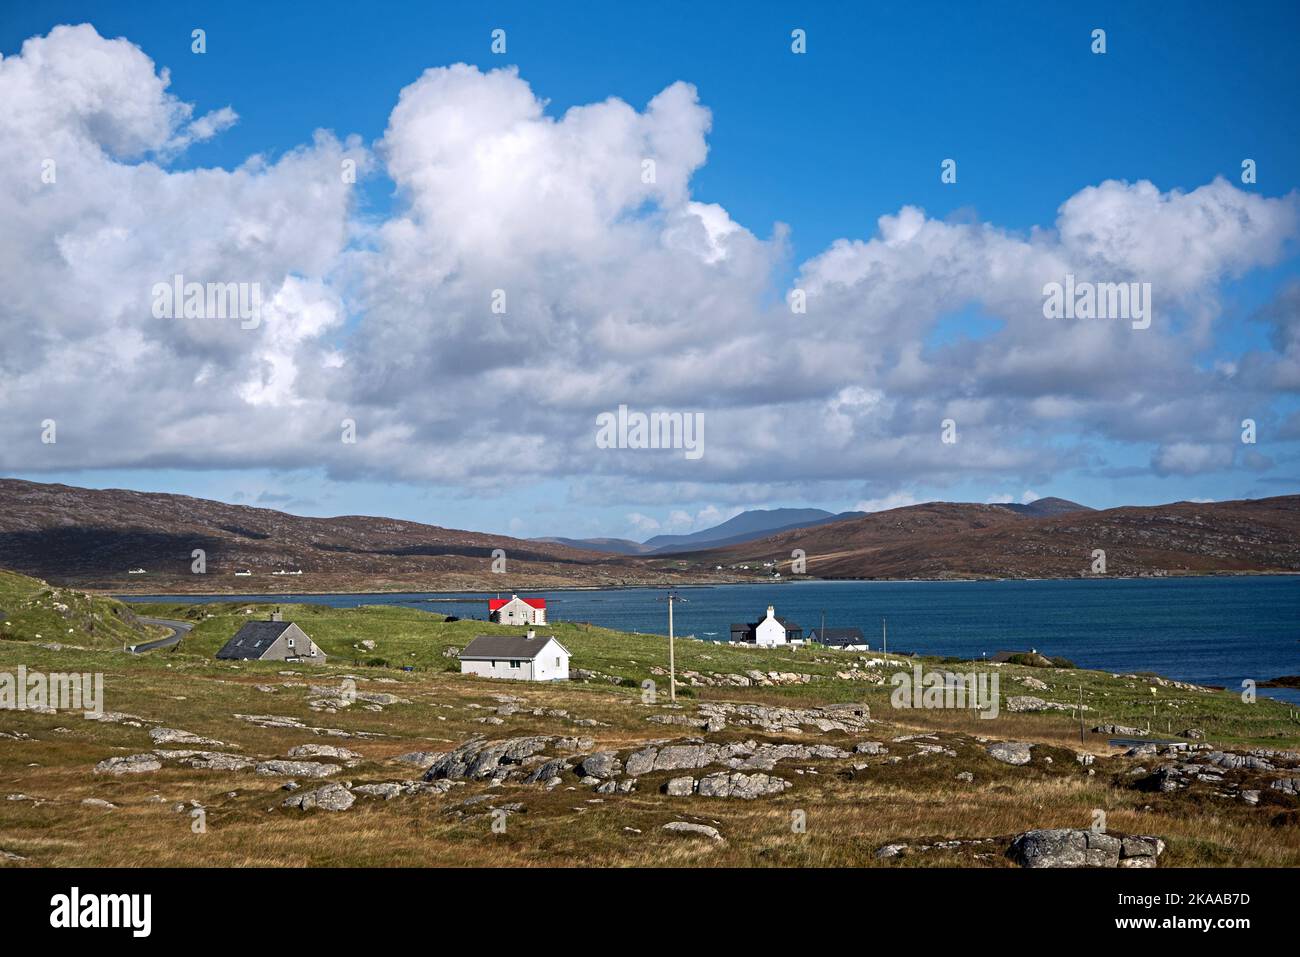 Remote crofts or dwellings on Eriskay in the Outer Hebrides, Scotland, UK. Stock Photo